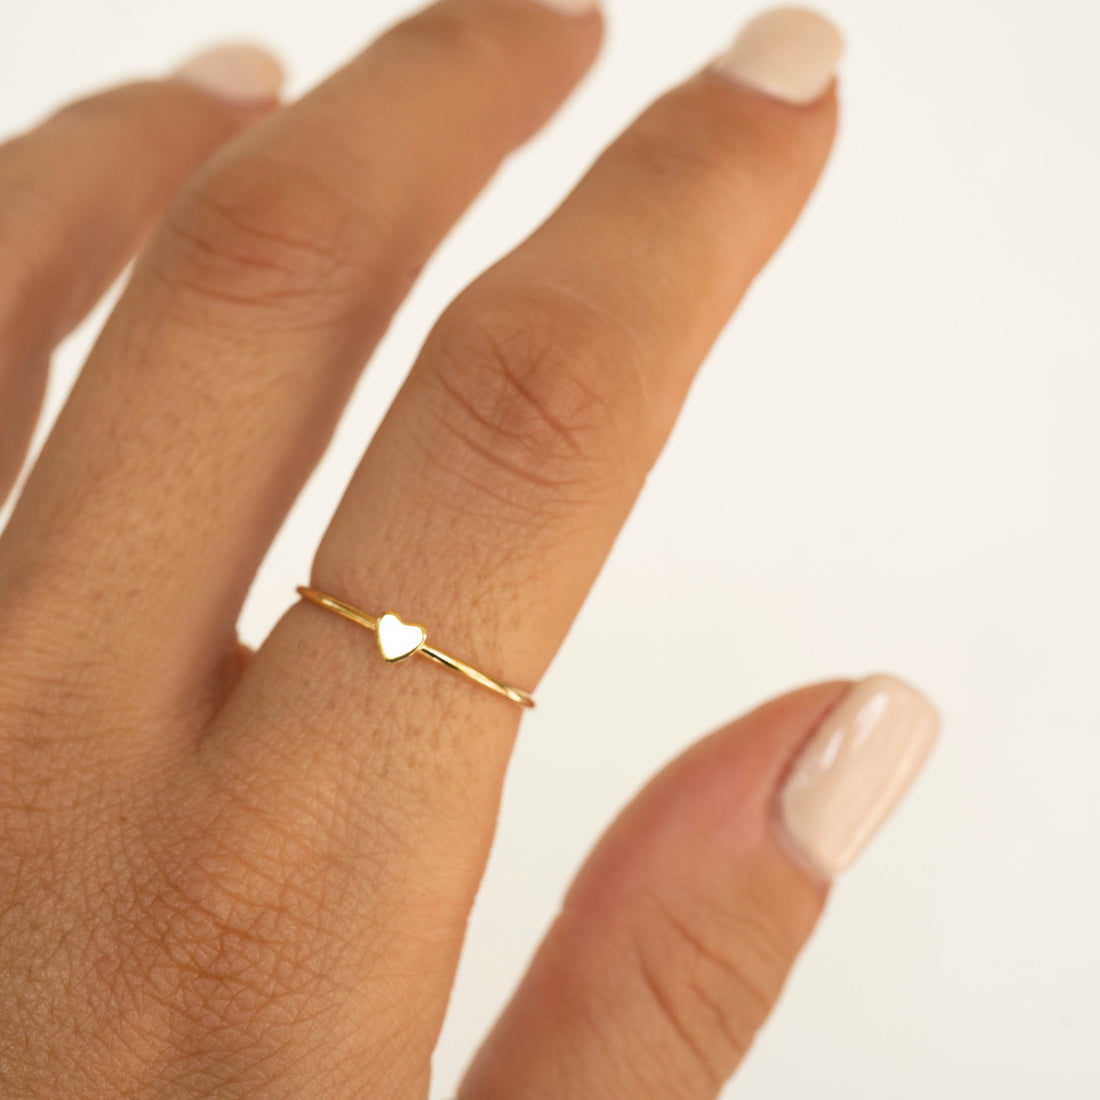 Gold Heart Stacker Ring, 14k Gold Filled Ring, Gold Stacker, Gold Band Ring, Simple Gold Ring, Womens Gold Ring, Dainty Gold Ring